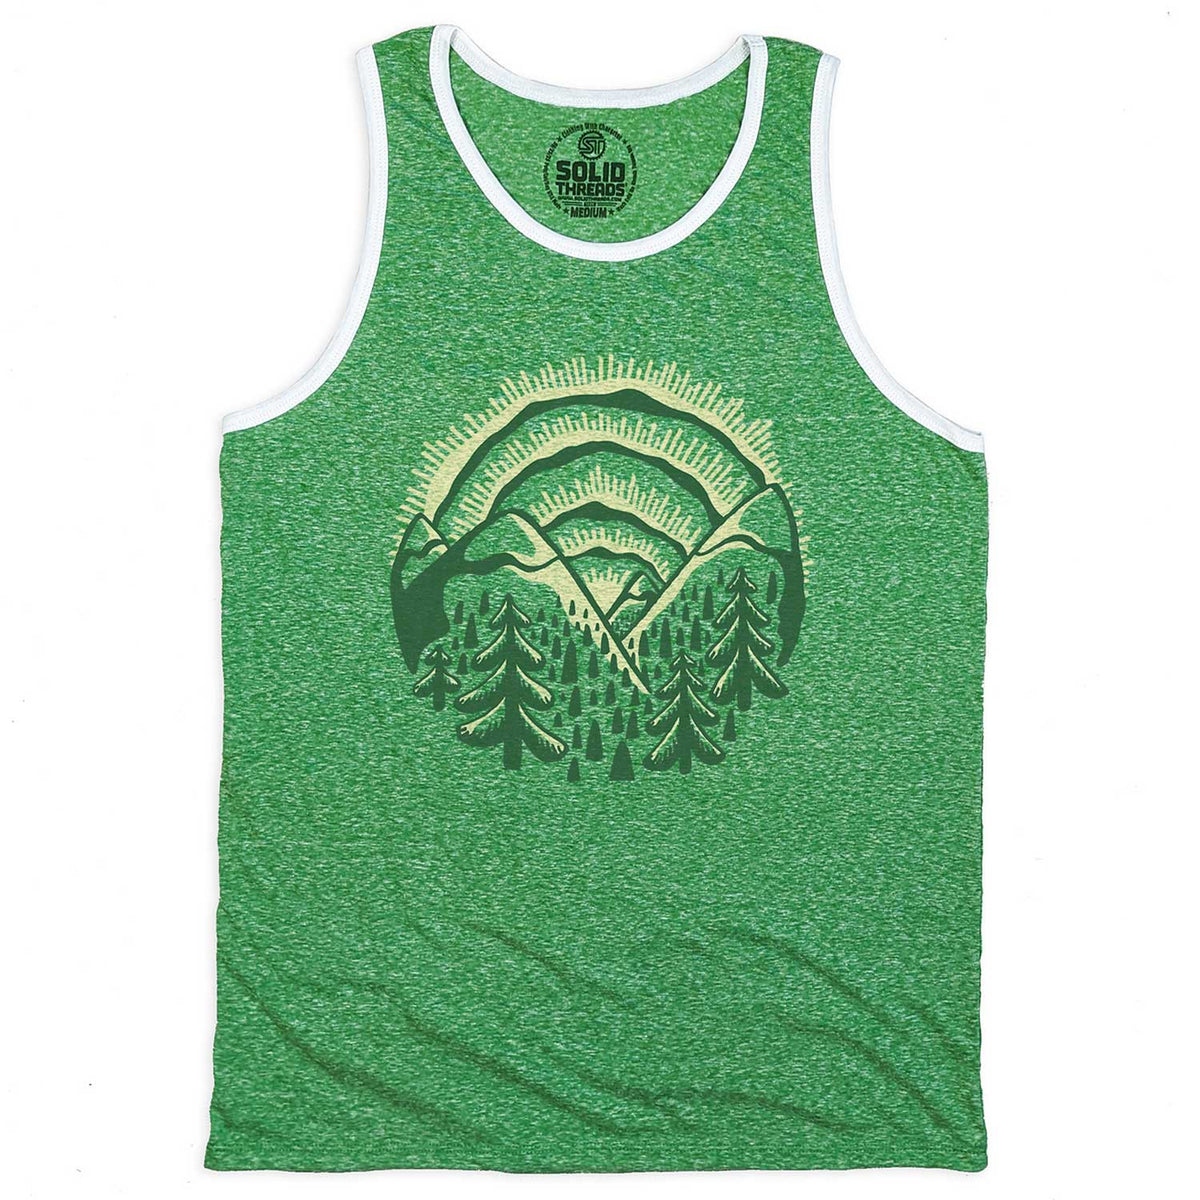 Men&#39;s Sunset Vintage Graphic Tank Top | Retro Nature T-shirt | Solid Threads